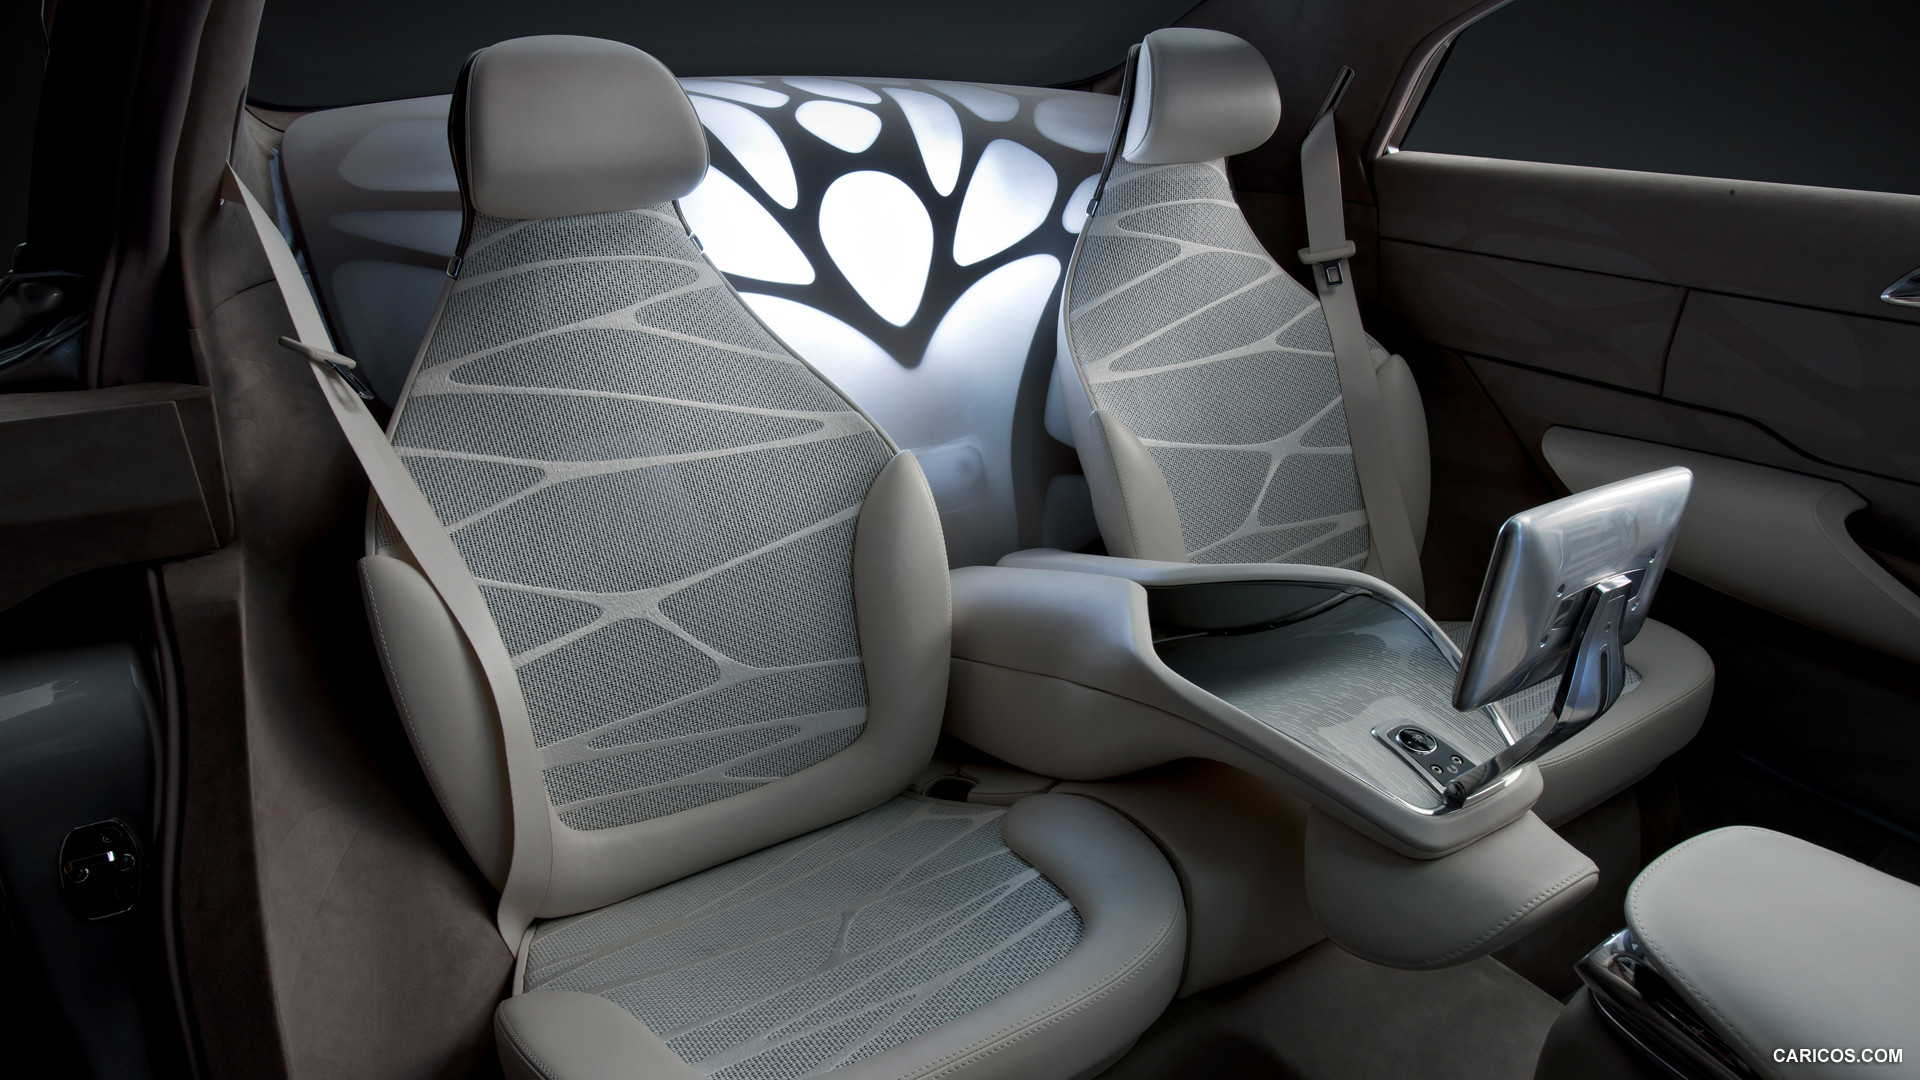 Mercedes-Benz F800 Style Concept (2010)  - Interior, Rear Seats, #50 of 120